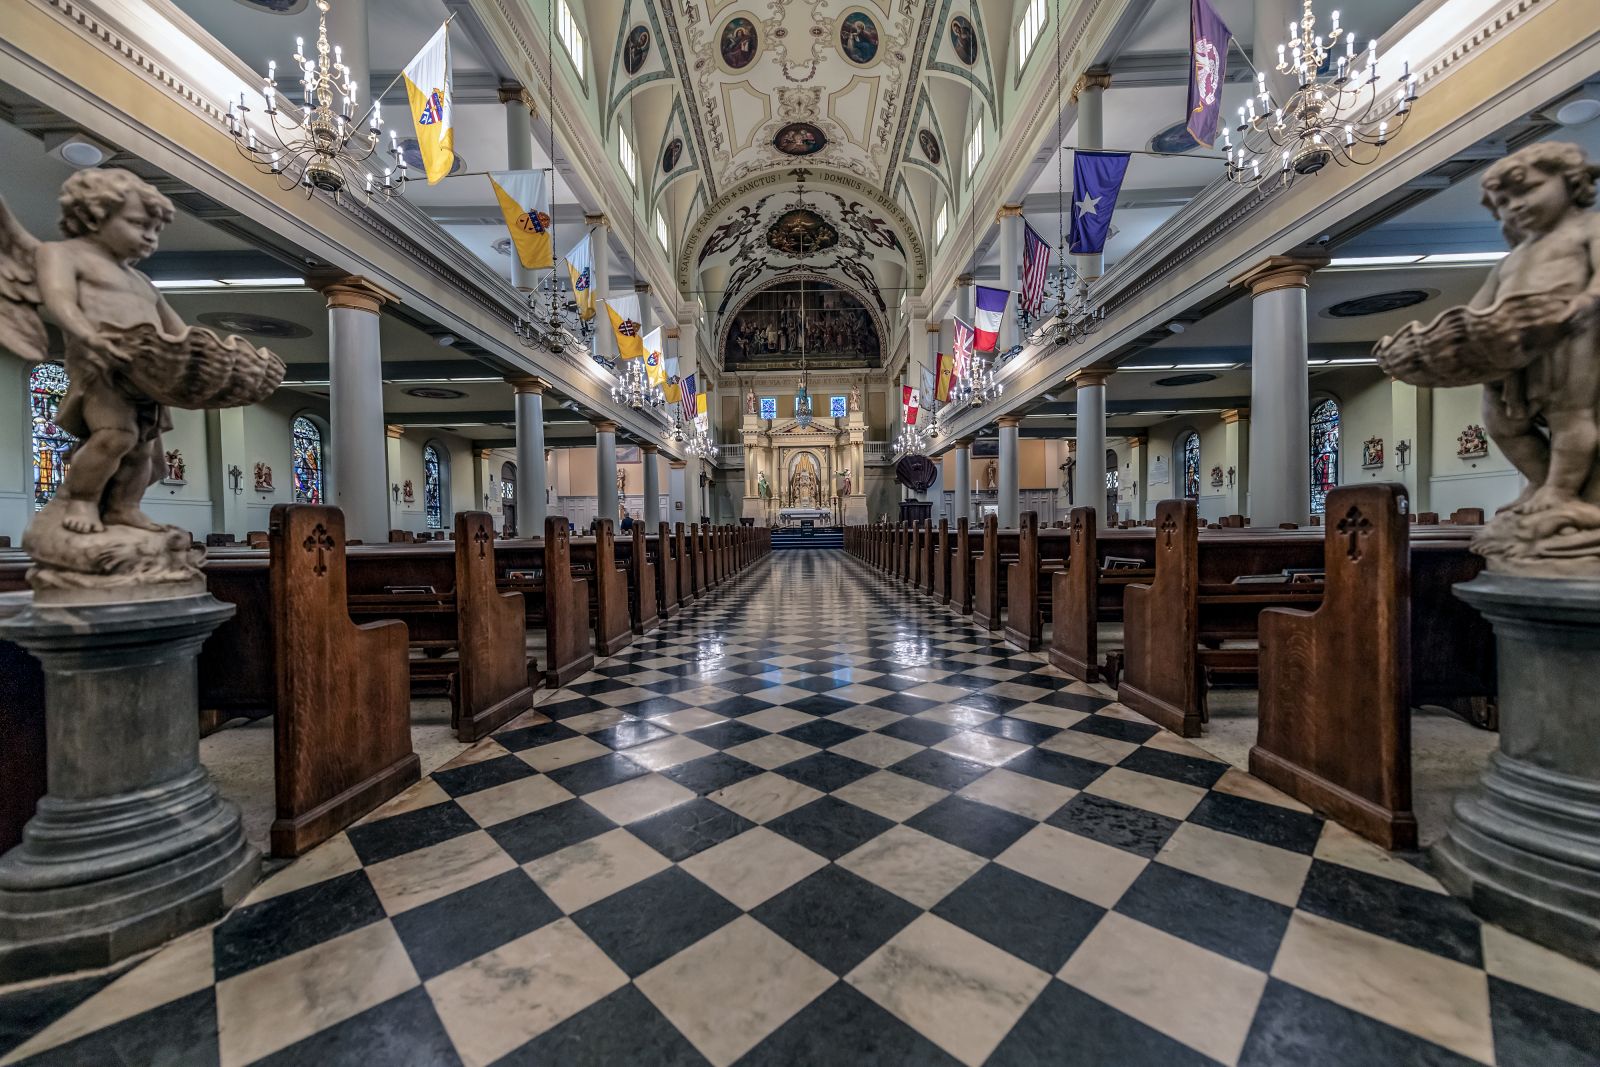 Interior of St. Louis Cathedral in New Orleans